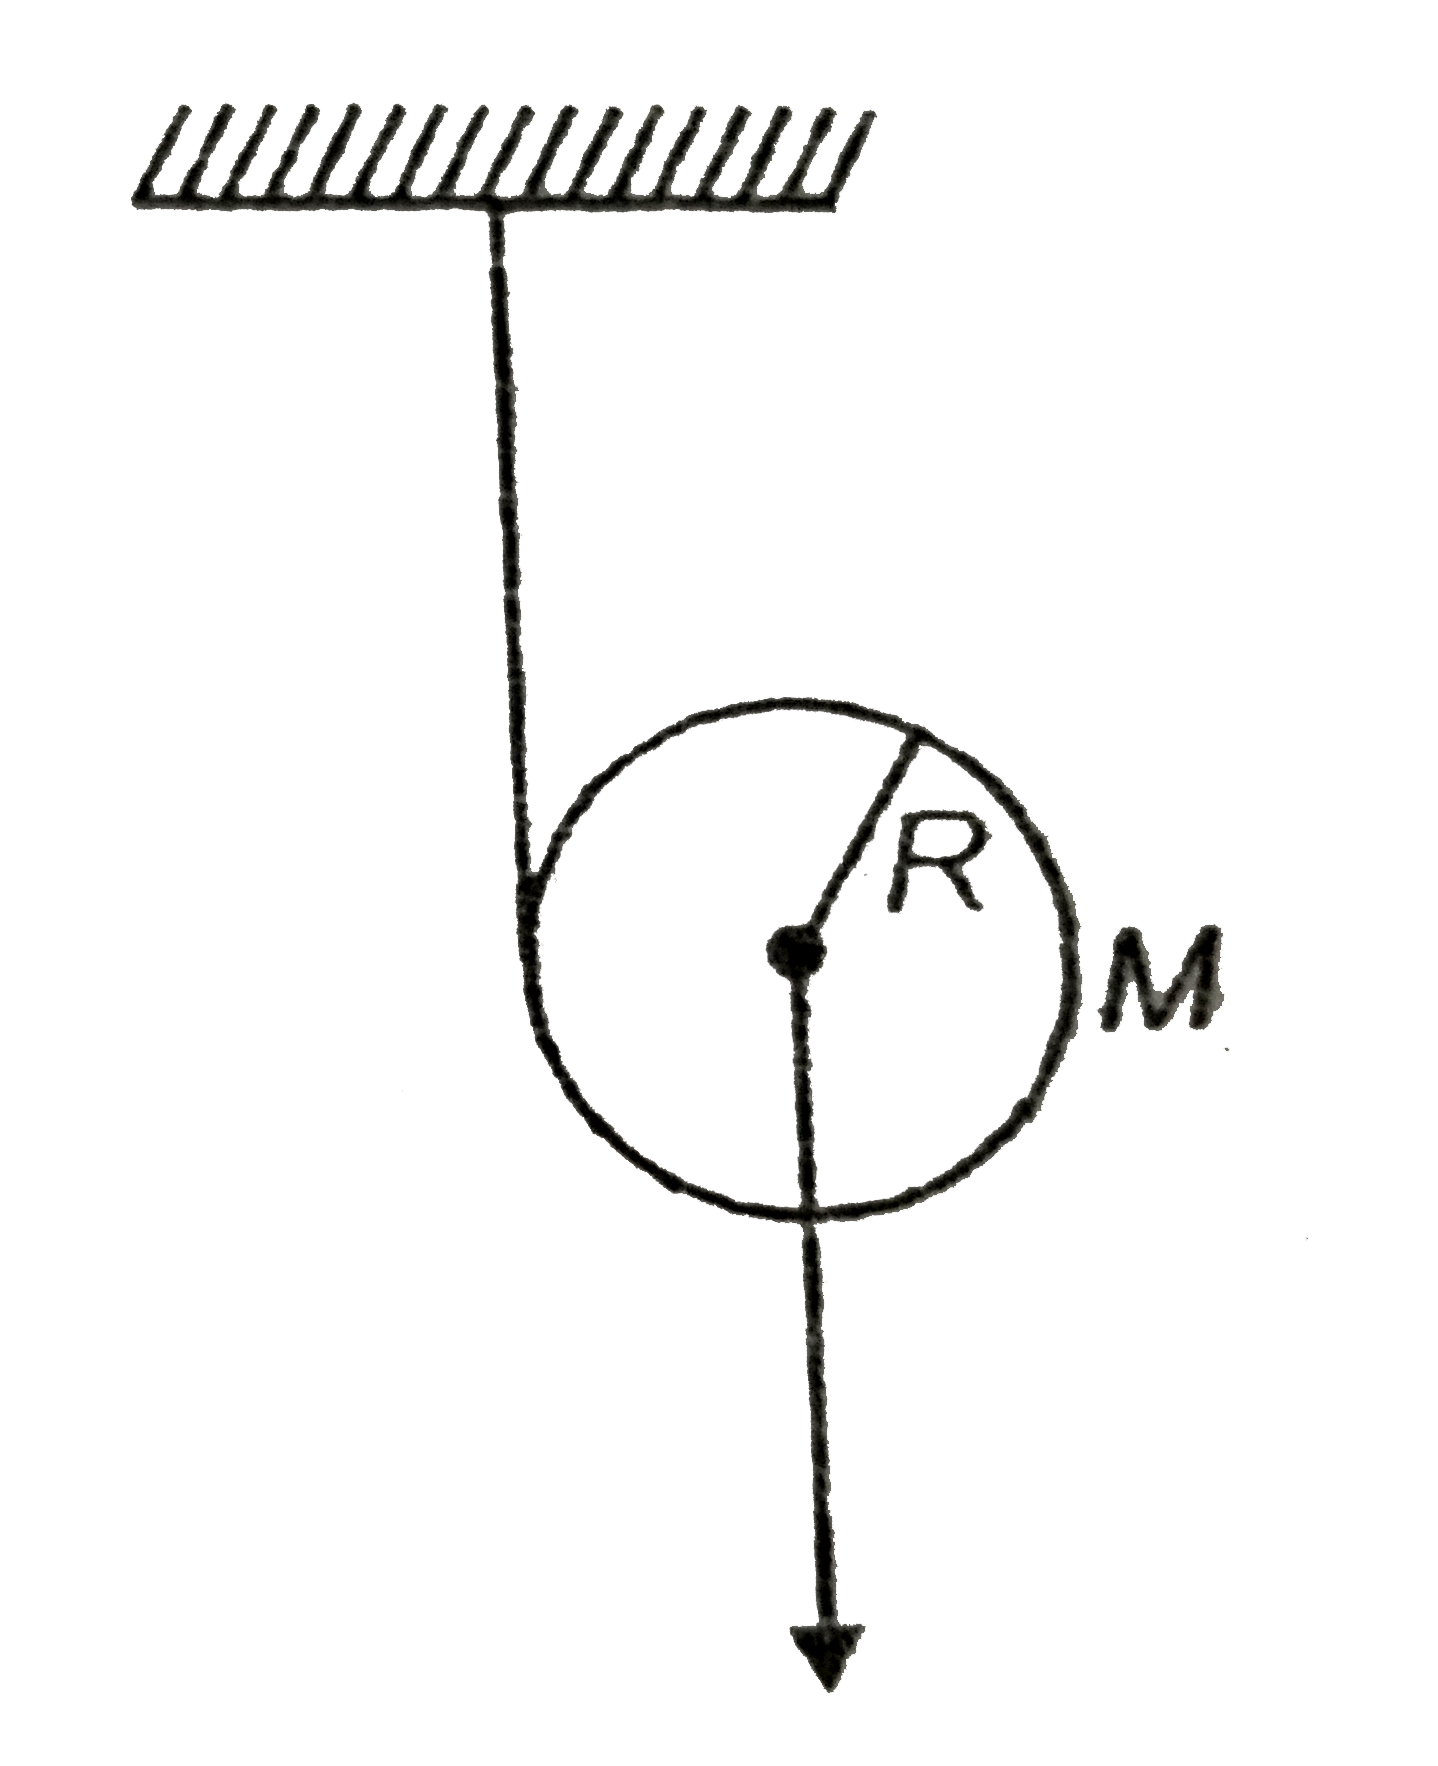 A disc of mass M has a light, thin string wrapped several times around its circumference. The free end of string is attaced to the ceiling and the disc is released from rest. Find the acceleration of the disc and the tension in the string.